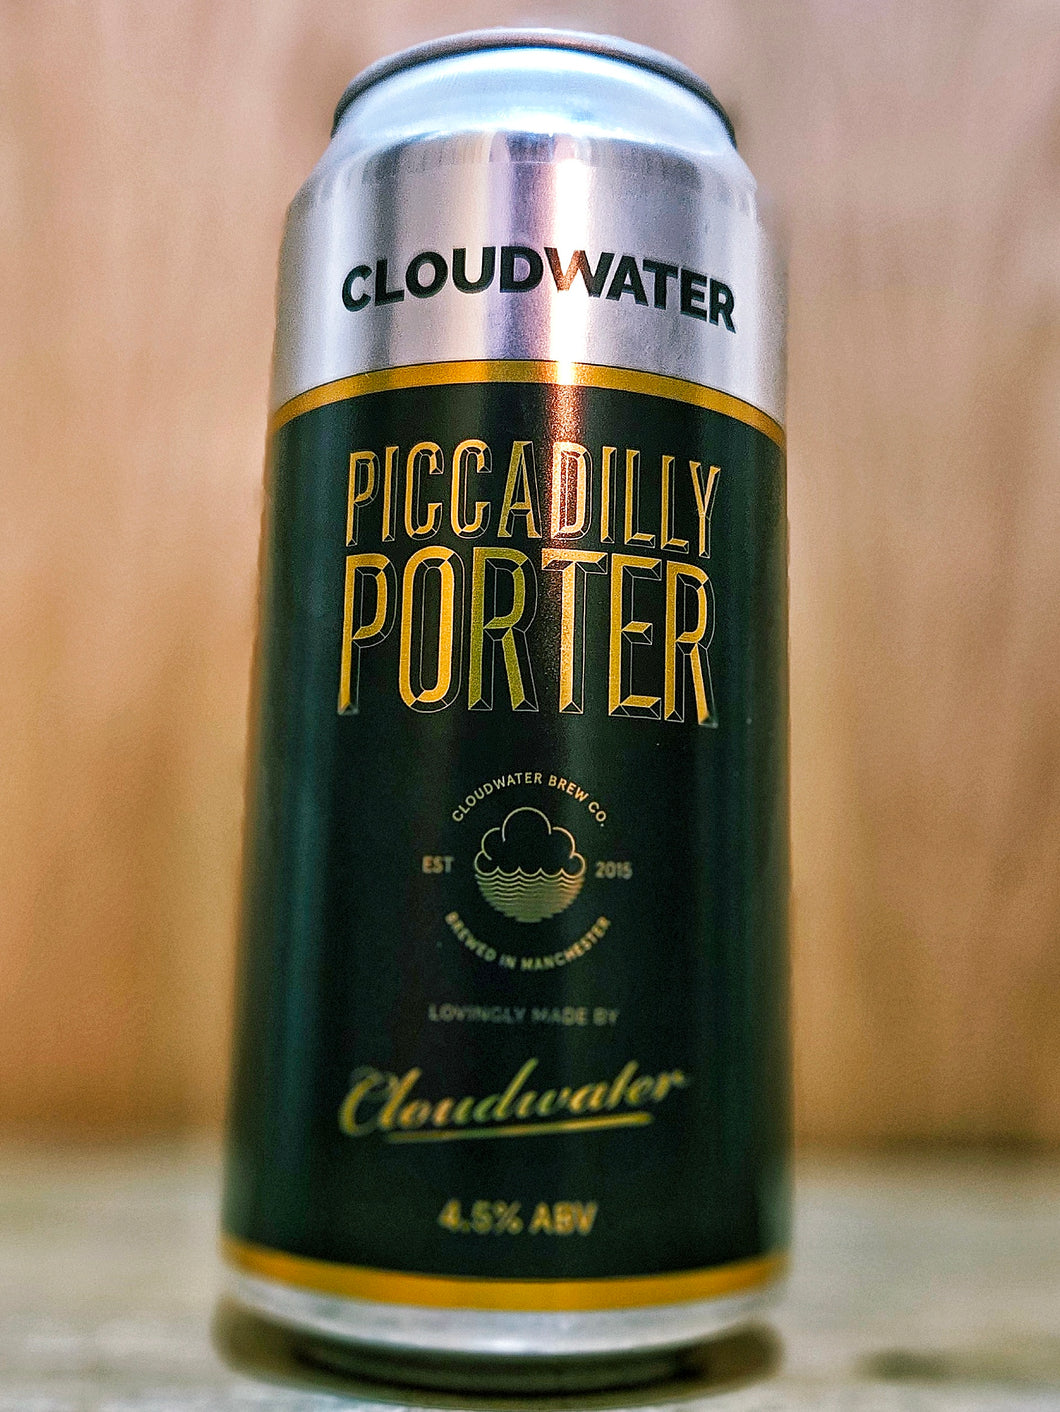 Cloudwater - Piccadilly Porter